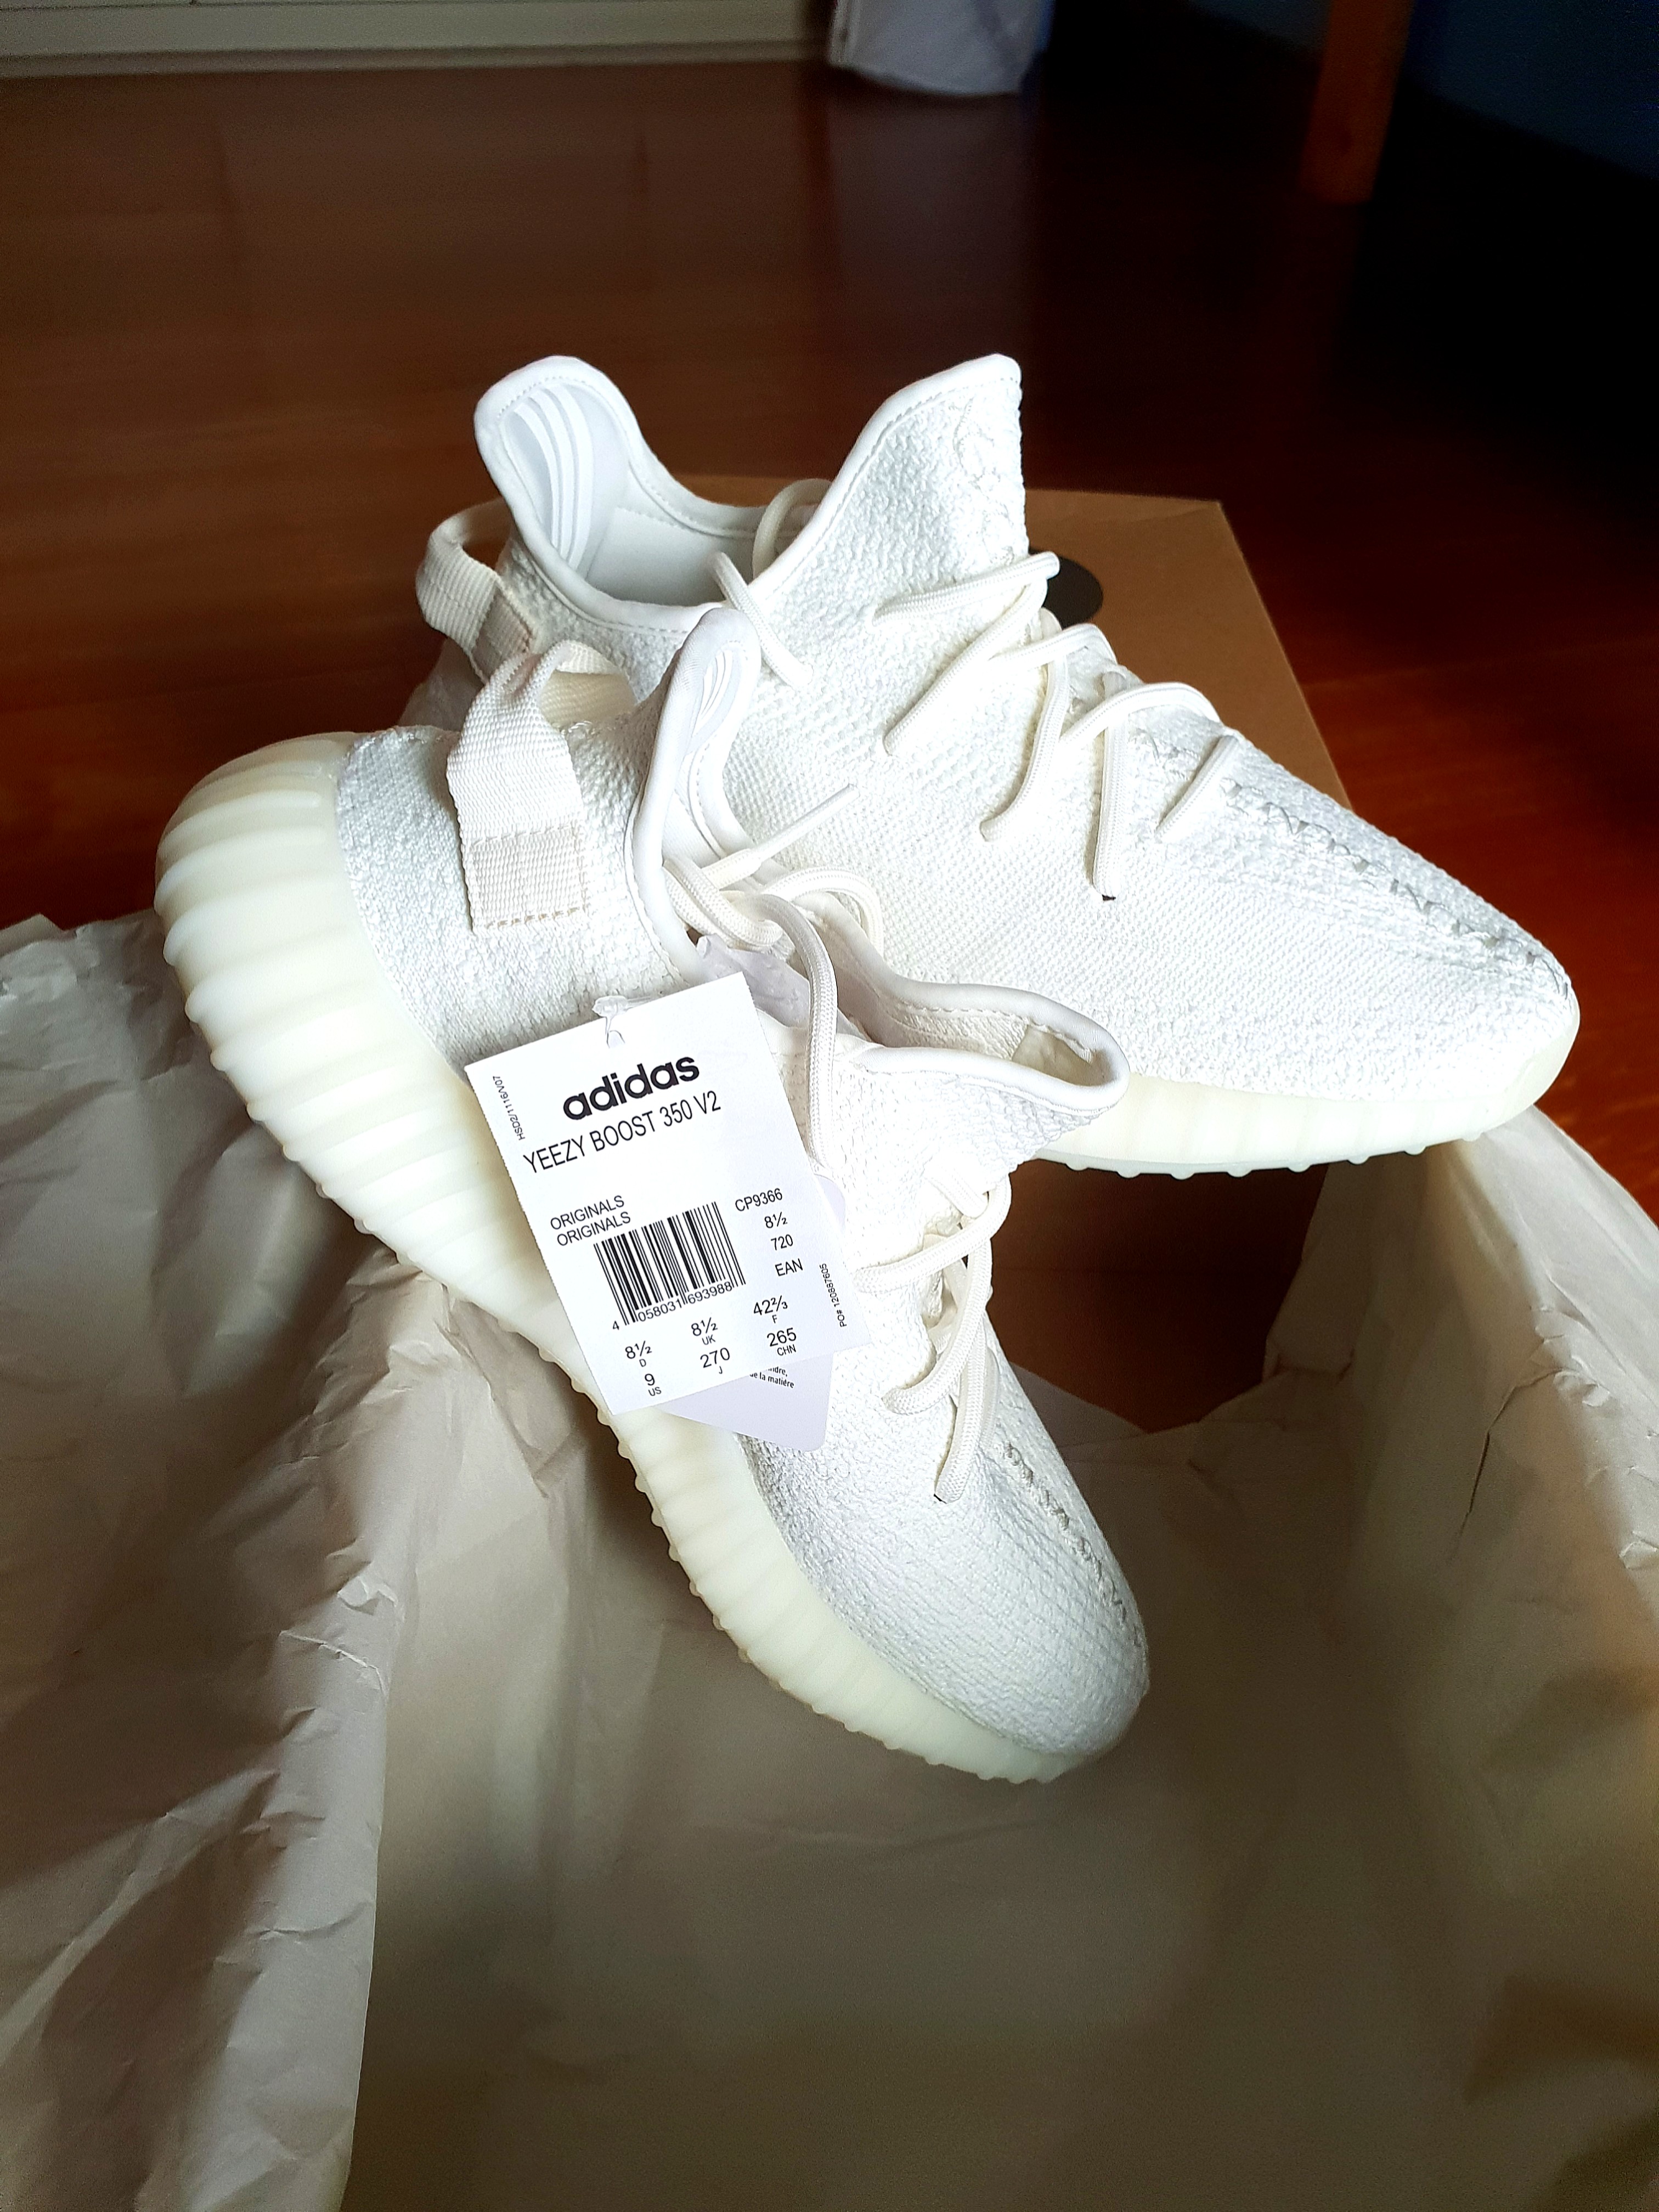 triple white yeezy outfit